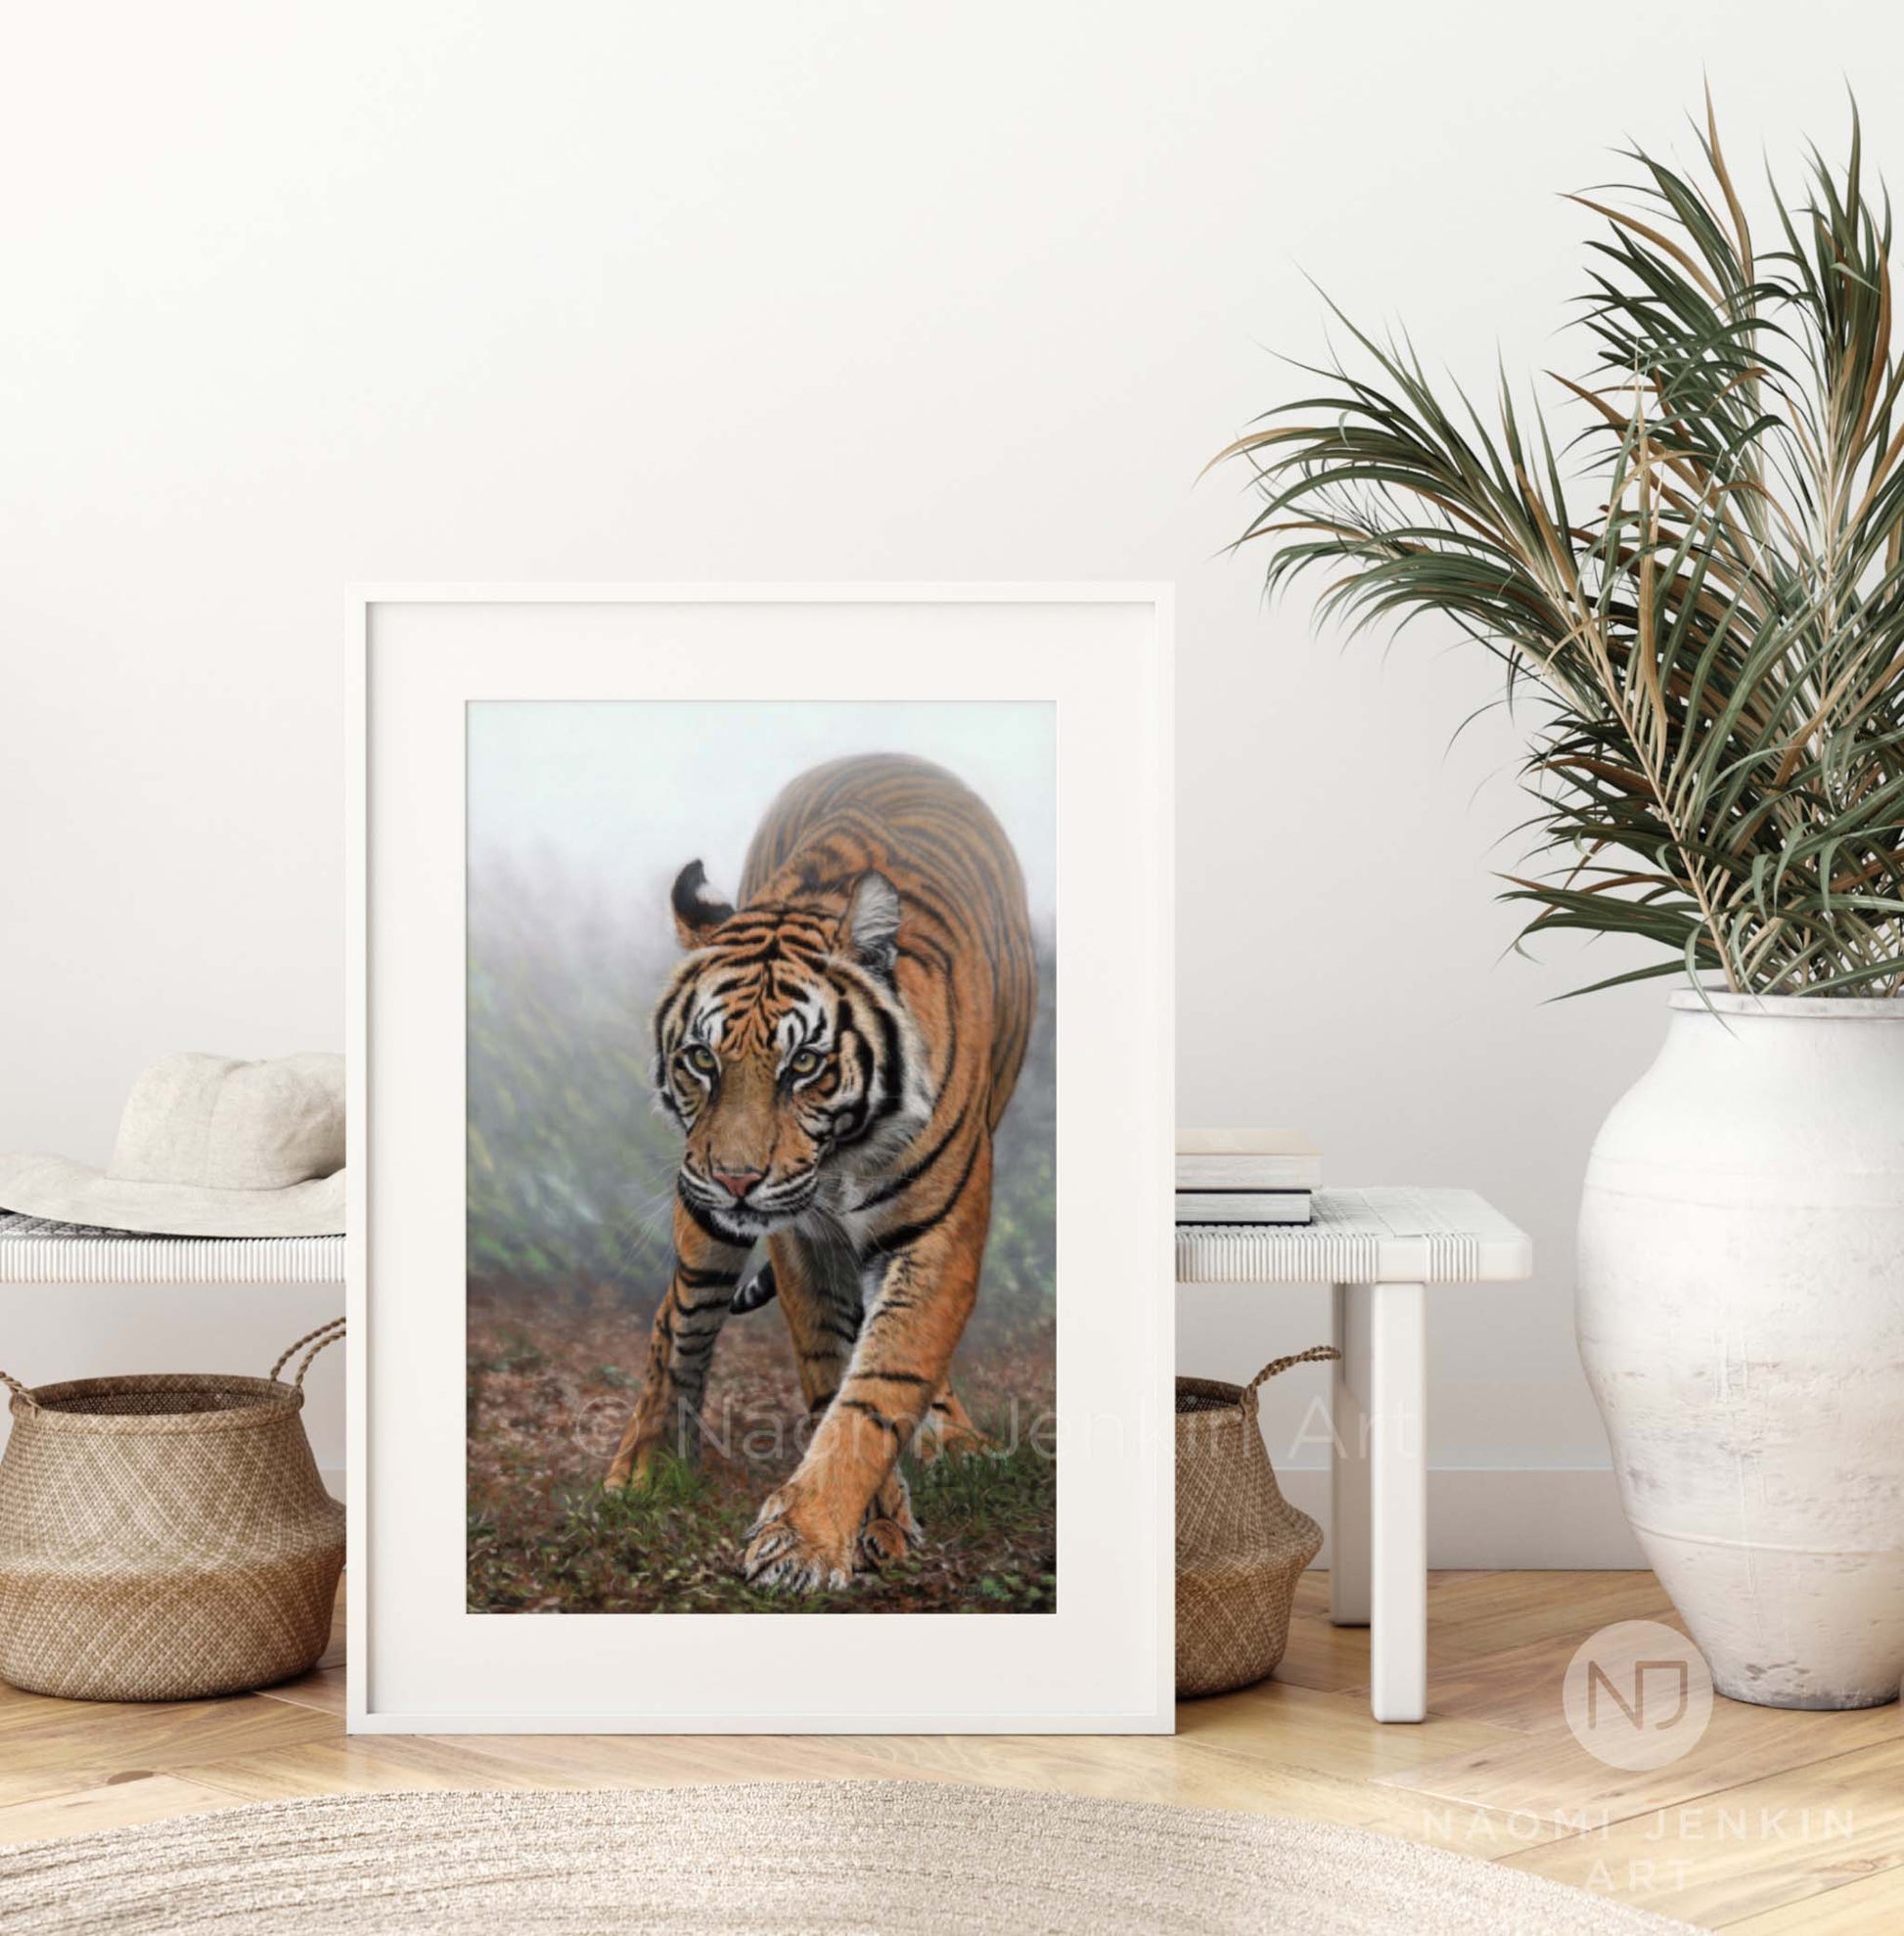 Limited edition tiger art print "Stealth" in a white frame by Naomi Jenkin Art.